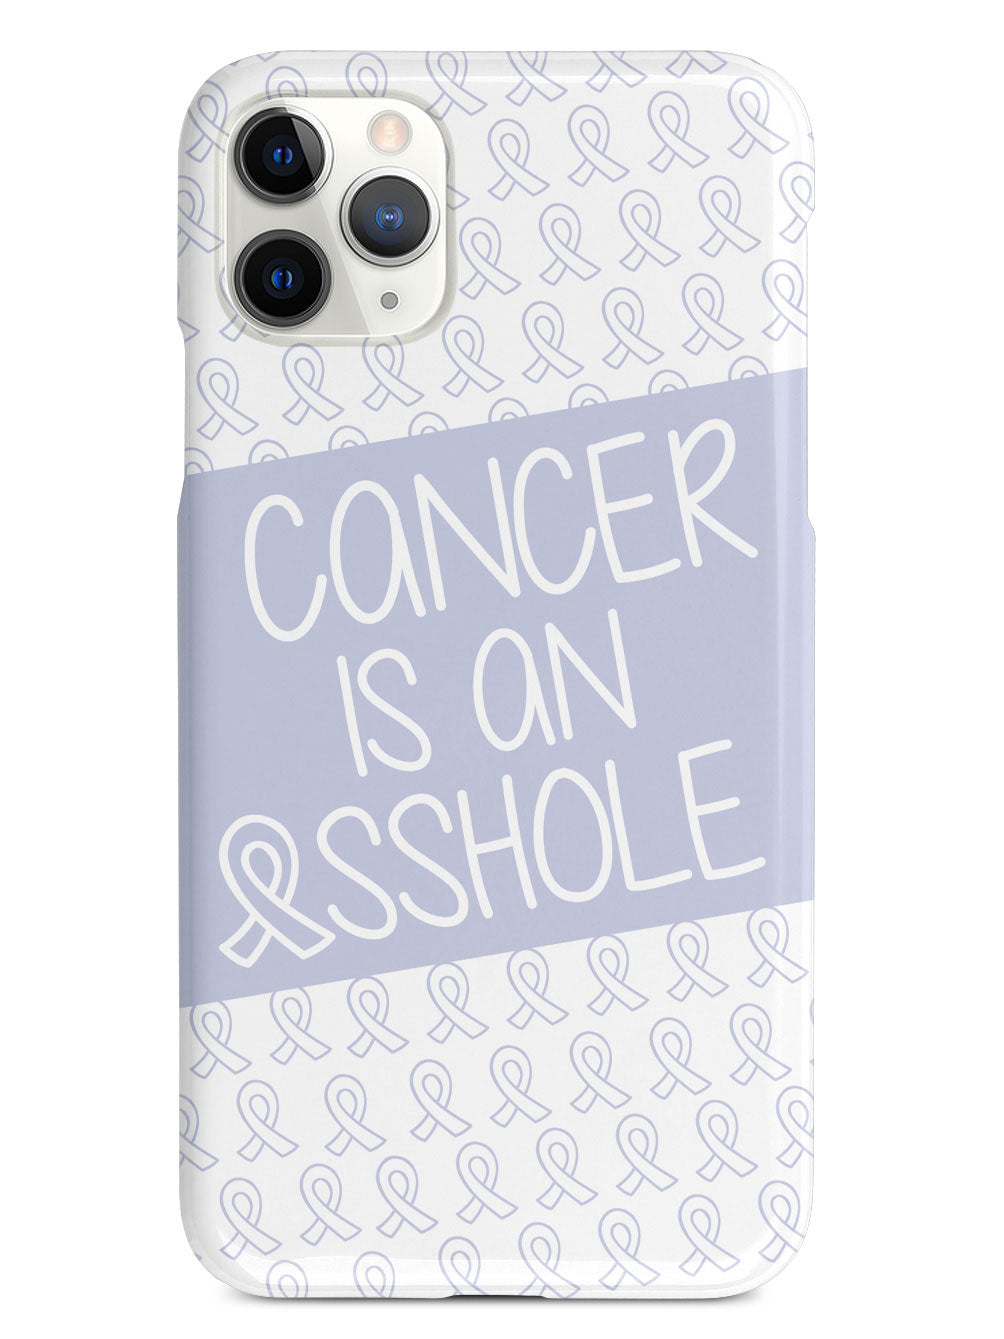 Cancer Is An Asshole - Periwinkle Case